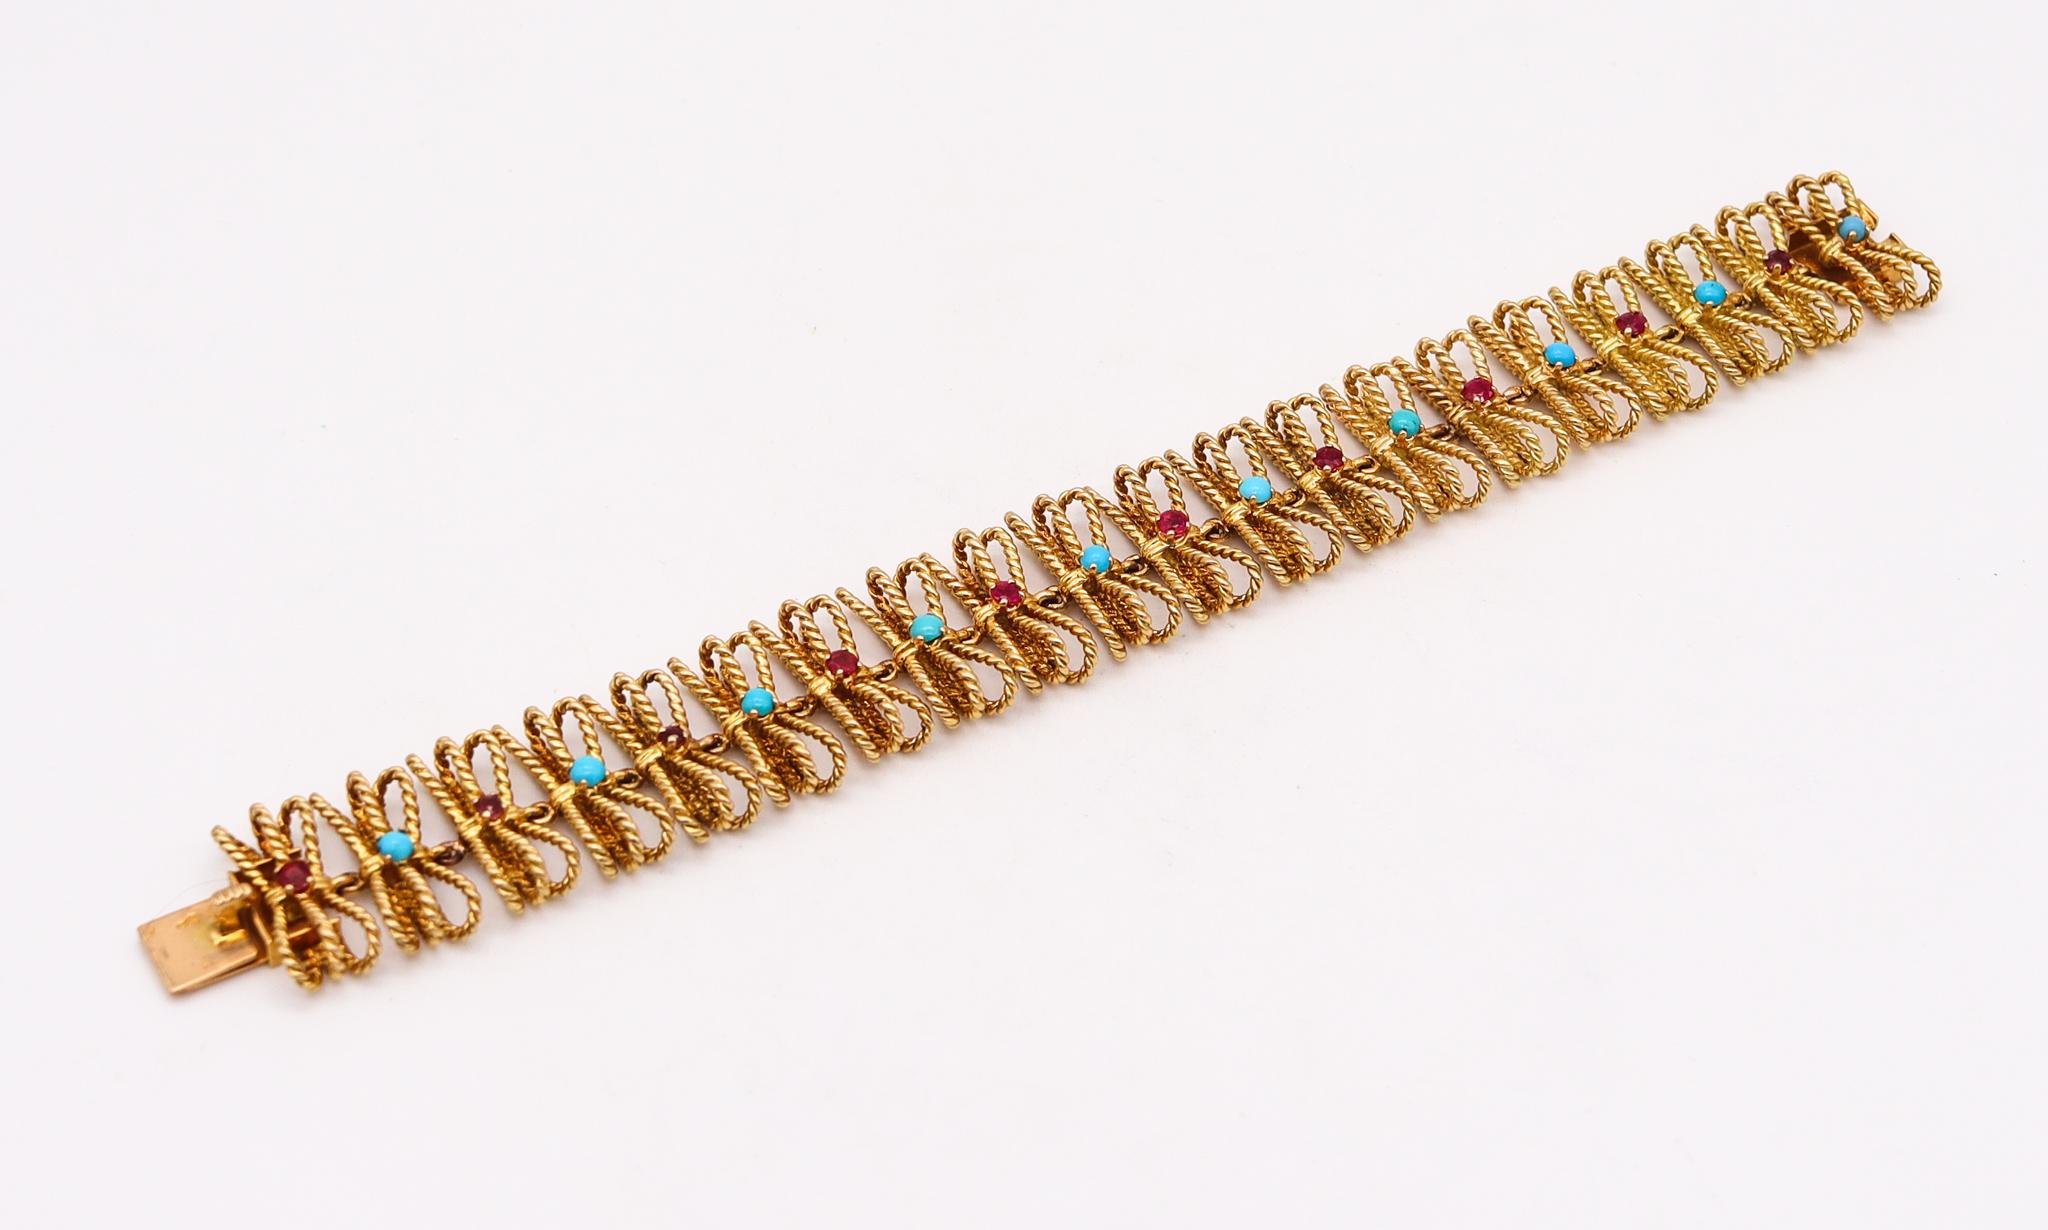 Bracelet designed by Mellerio-Dits Meller.

Beautiful colorful bracelet, created in Paris France during the postwar period back in the late 1950 by the renowned jewelry house of Mellerio. This flexible bracelet has been made up, with intrica twisted